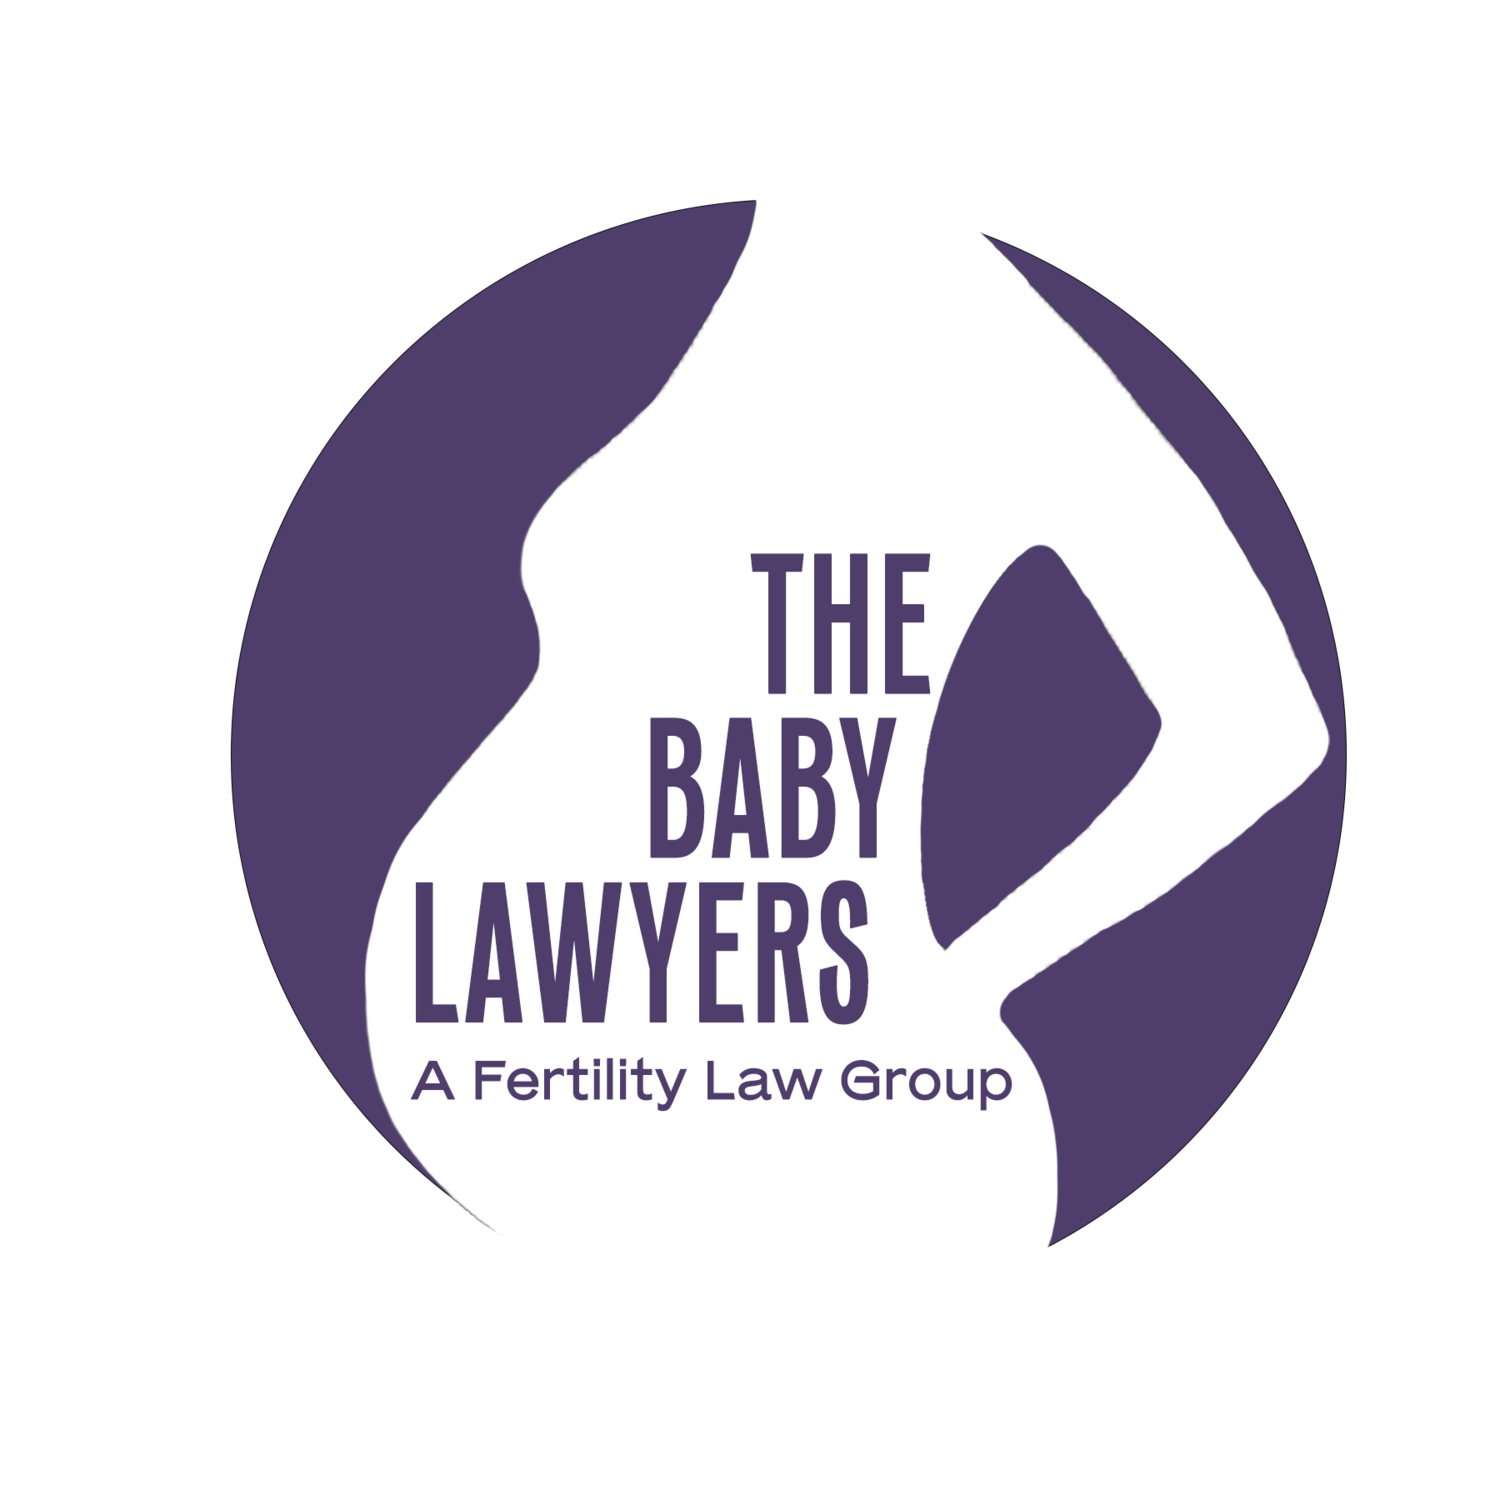 The Baby Lawyers